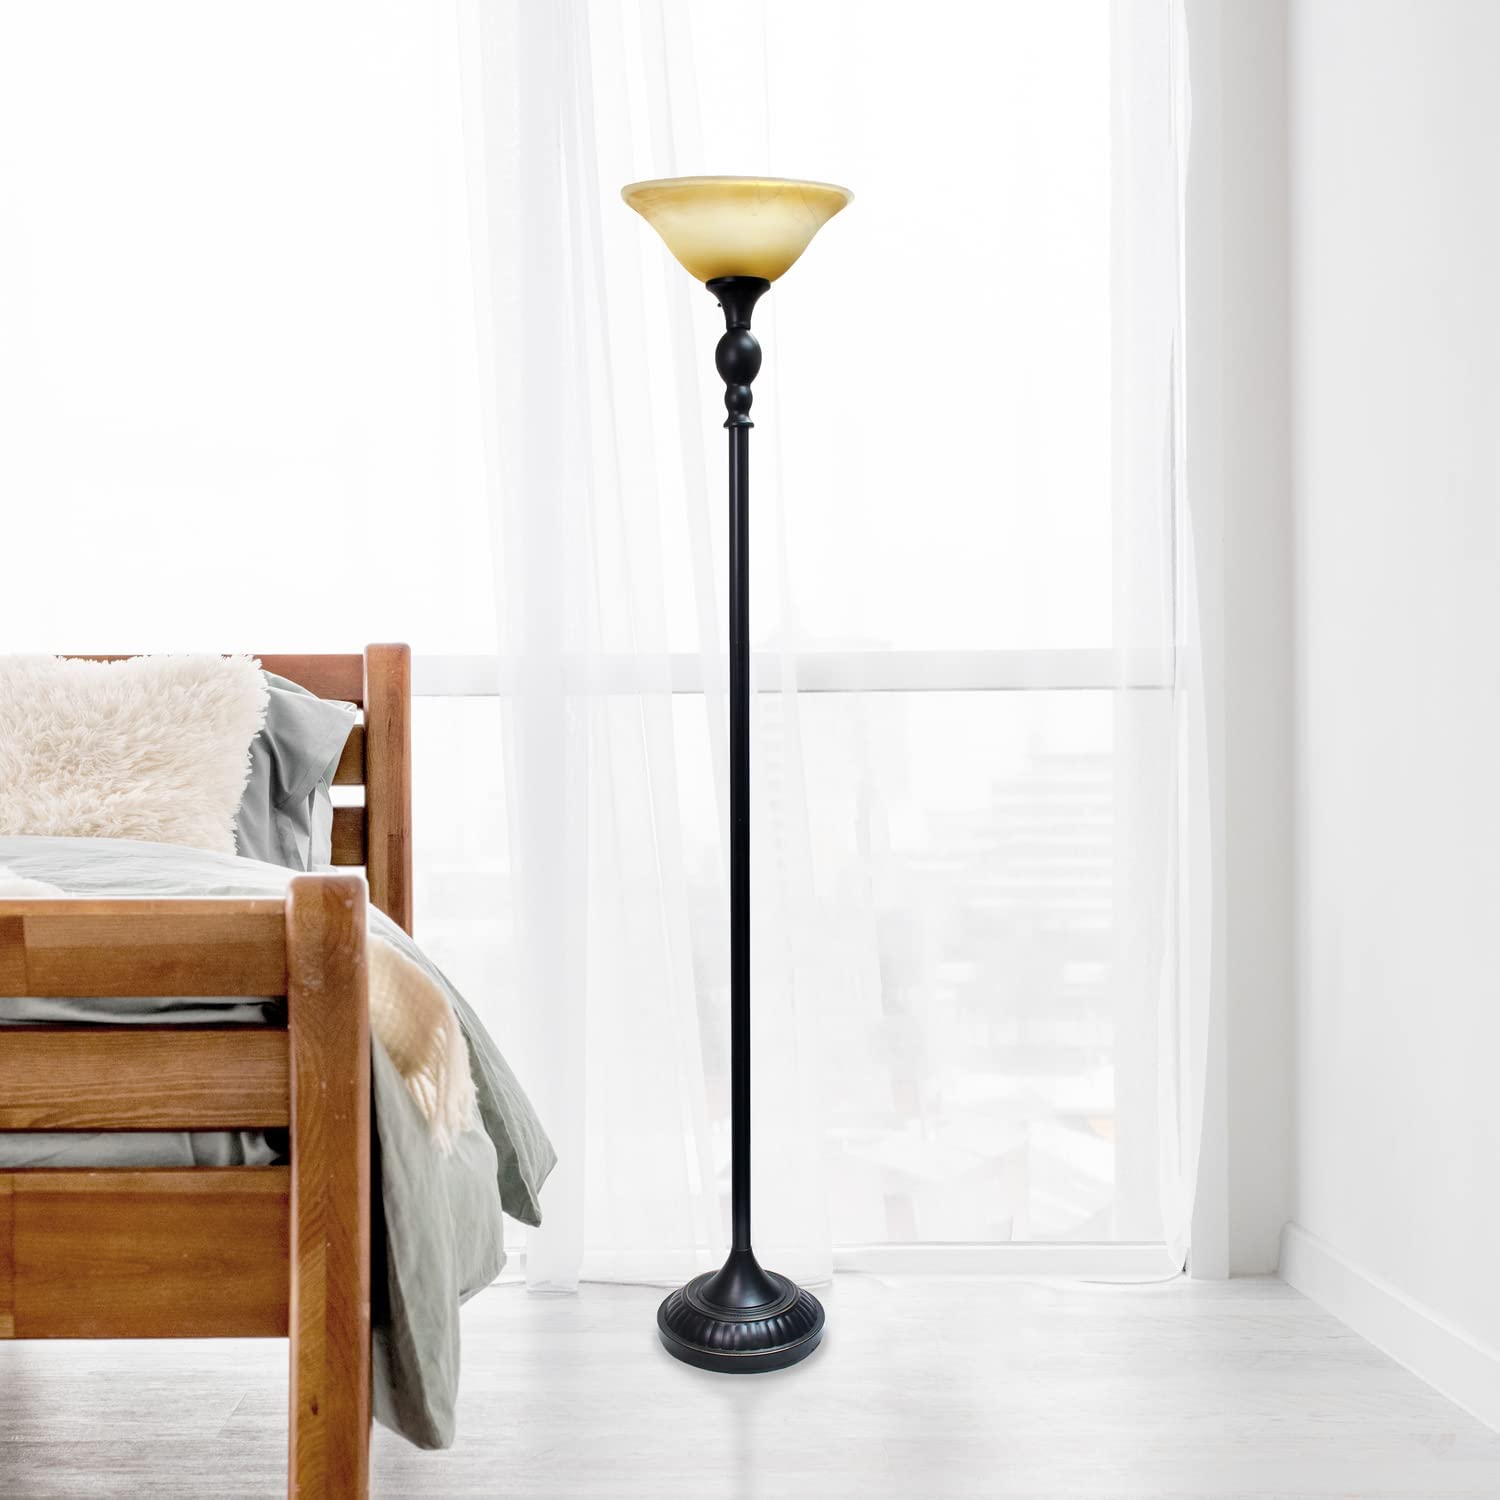 Lalia Home Bronze Torchiere Floor Lamp with Amber Shade